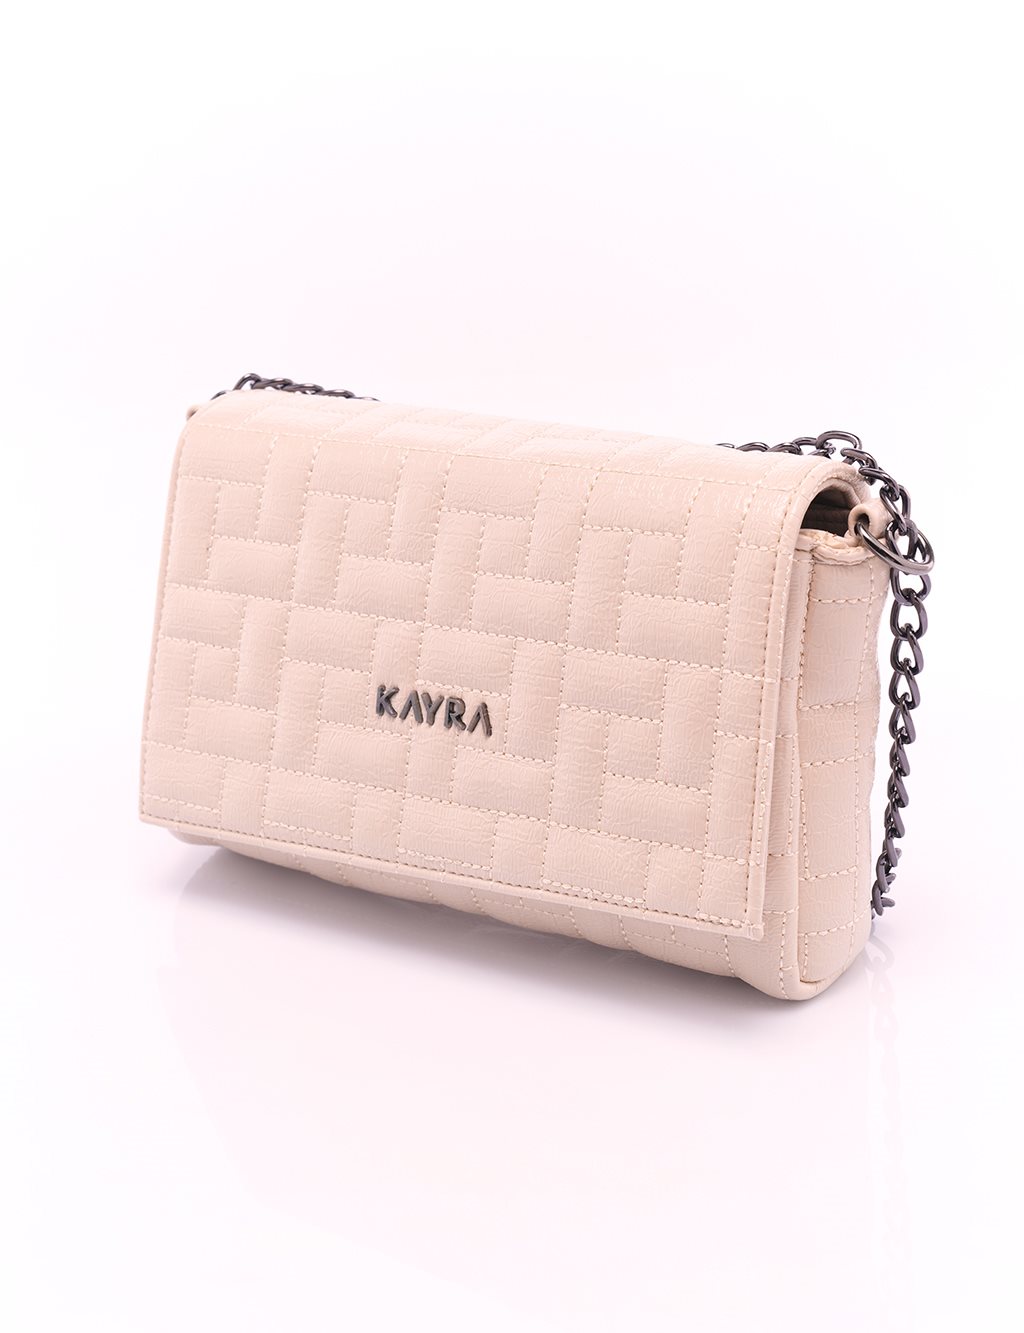 Croco Pattern Bag Cream with Cover